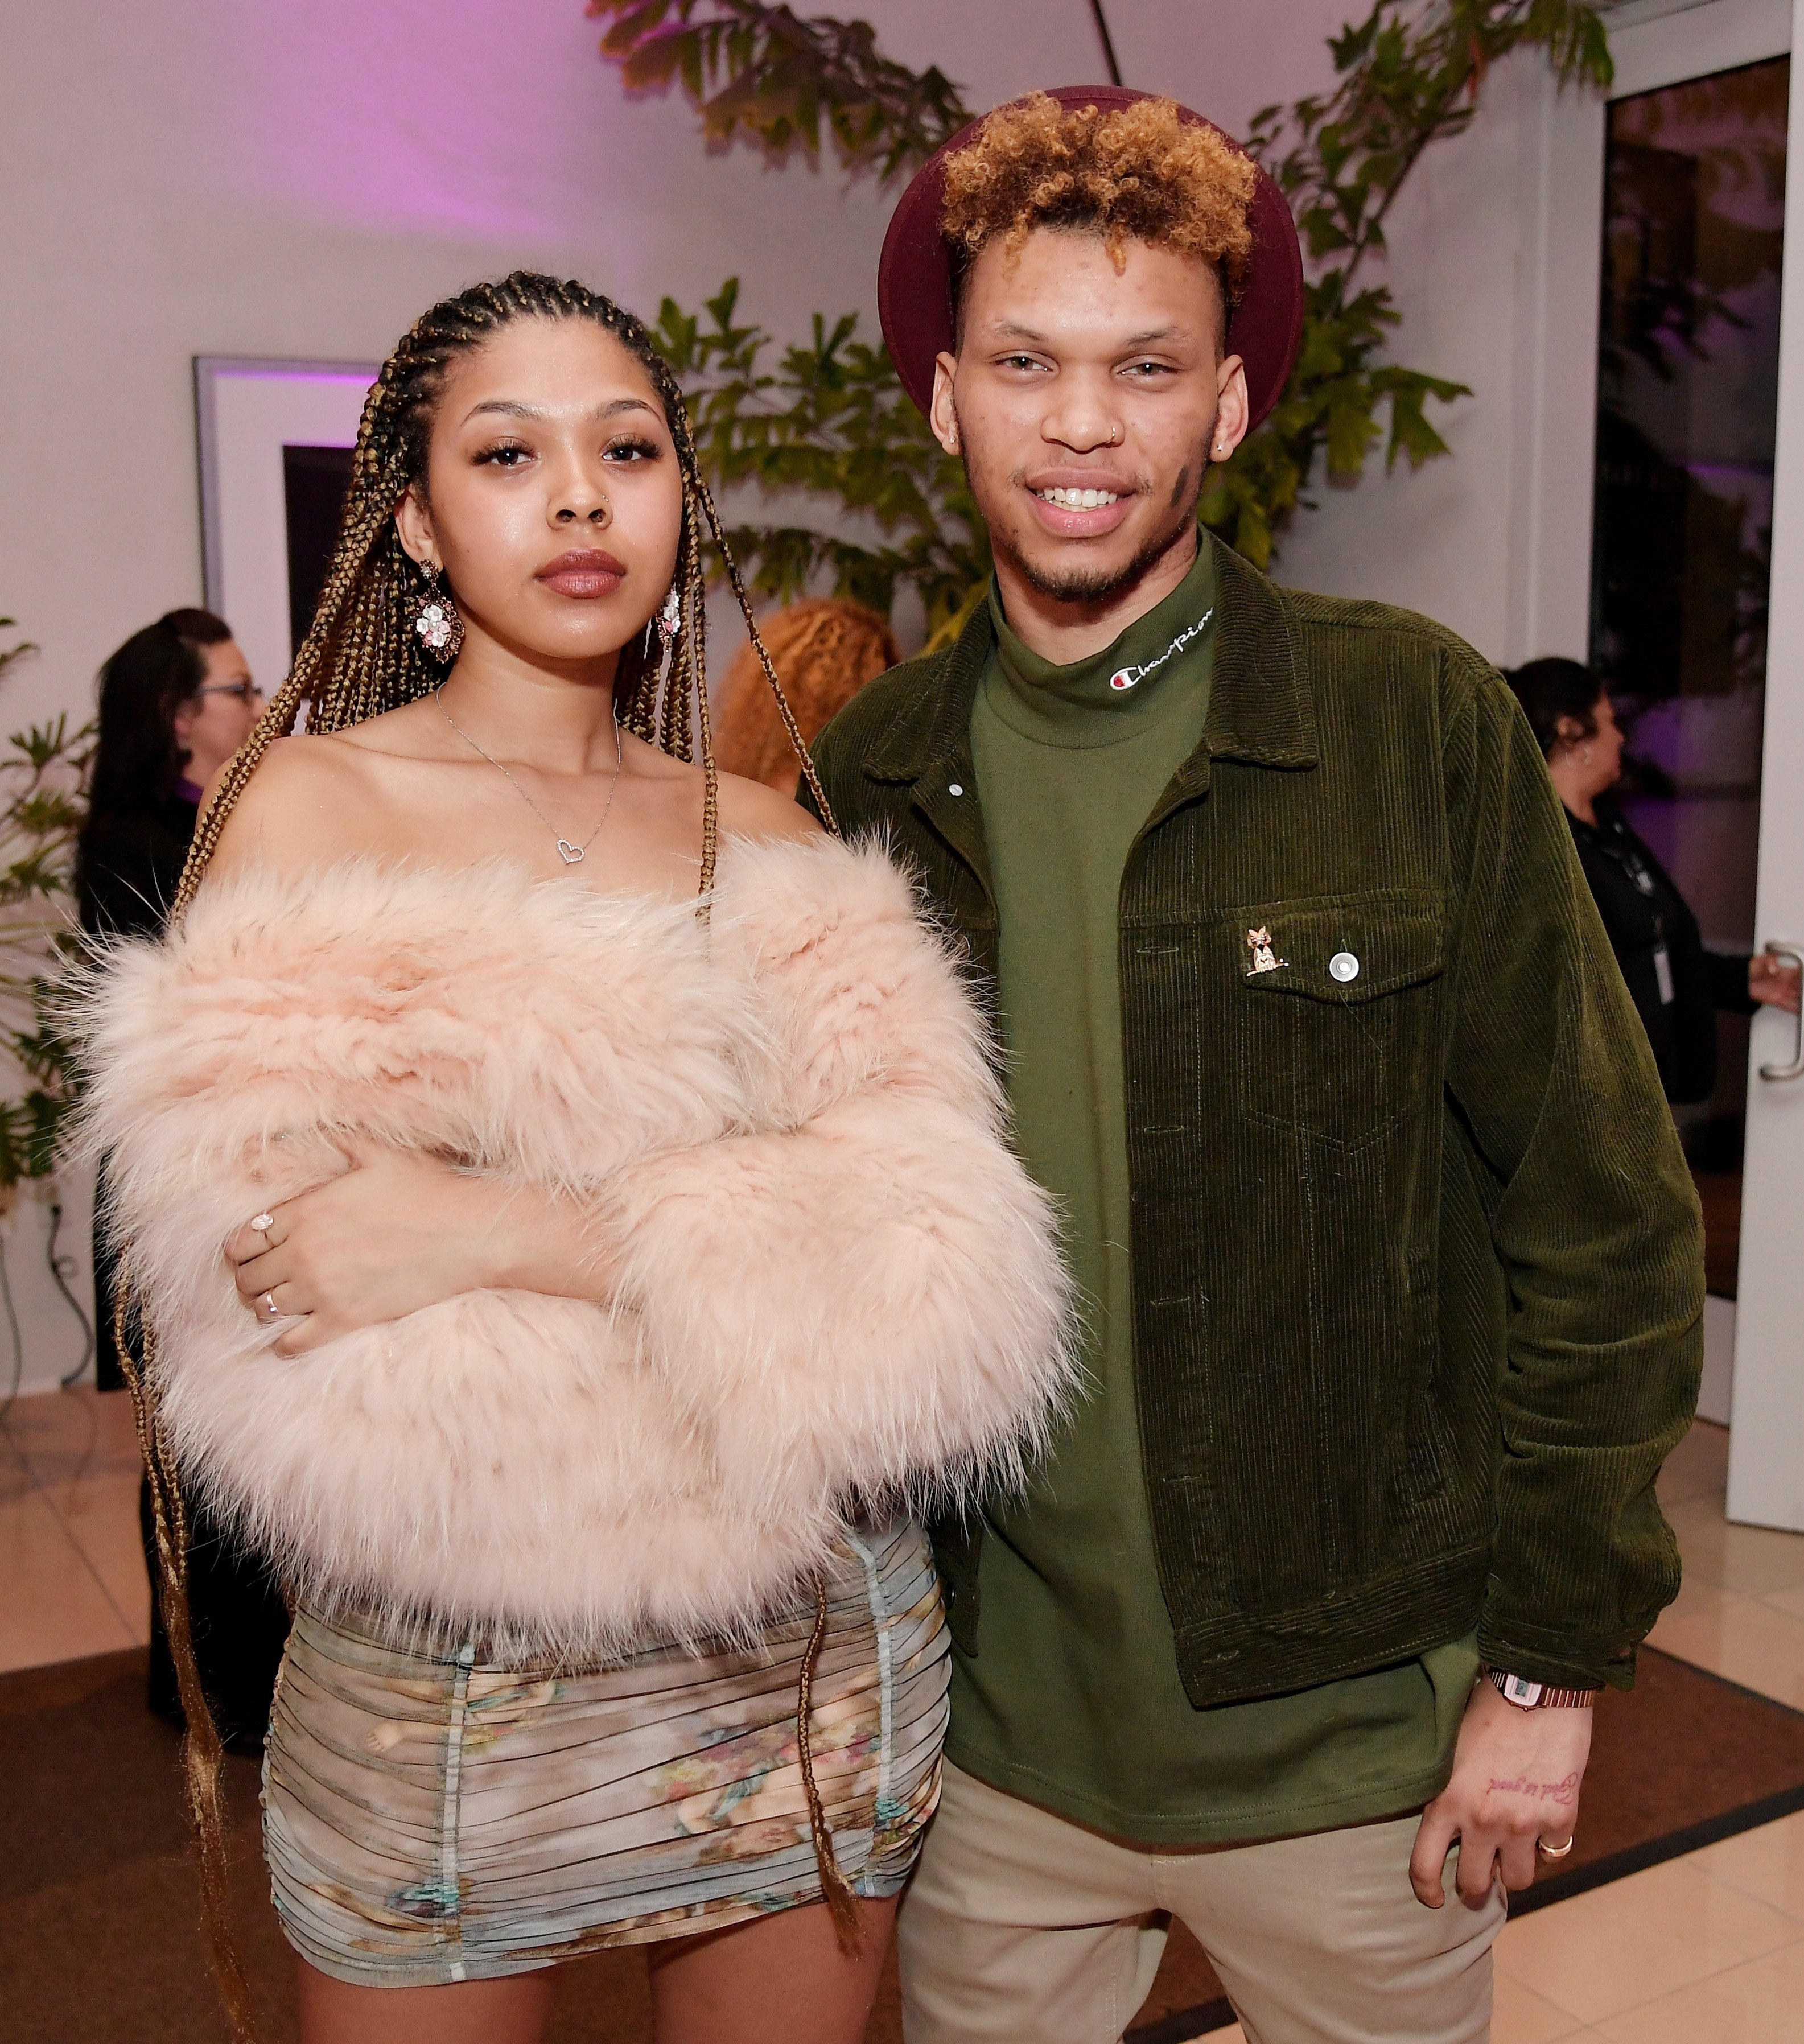 Victorie Franklin and Jordan Franklin at the Pre-GRAMMY Gala on February 9, 2019 | Source: Getty Images